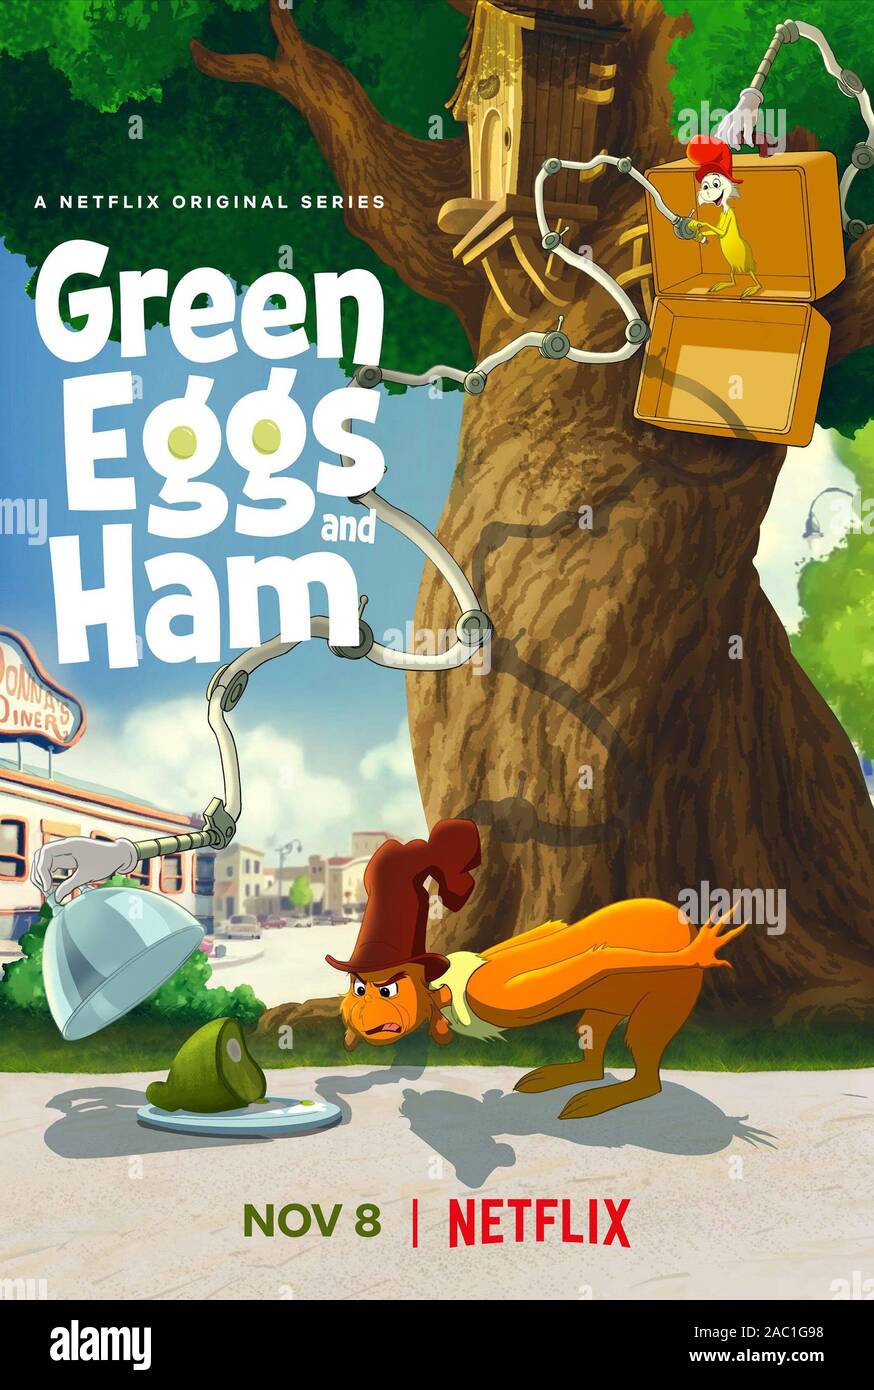 Green Eggs And Ham 2019 Directed By Jared Stern Credit Warner Bros Animation Album Stock